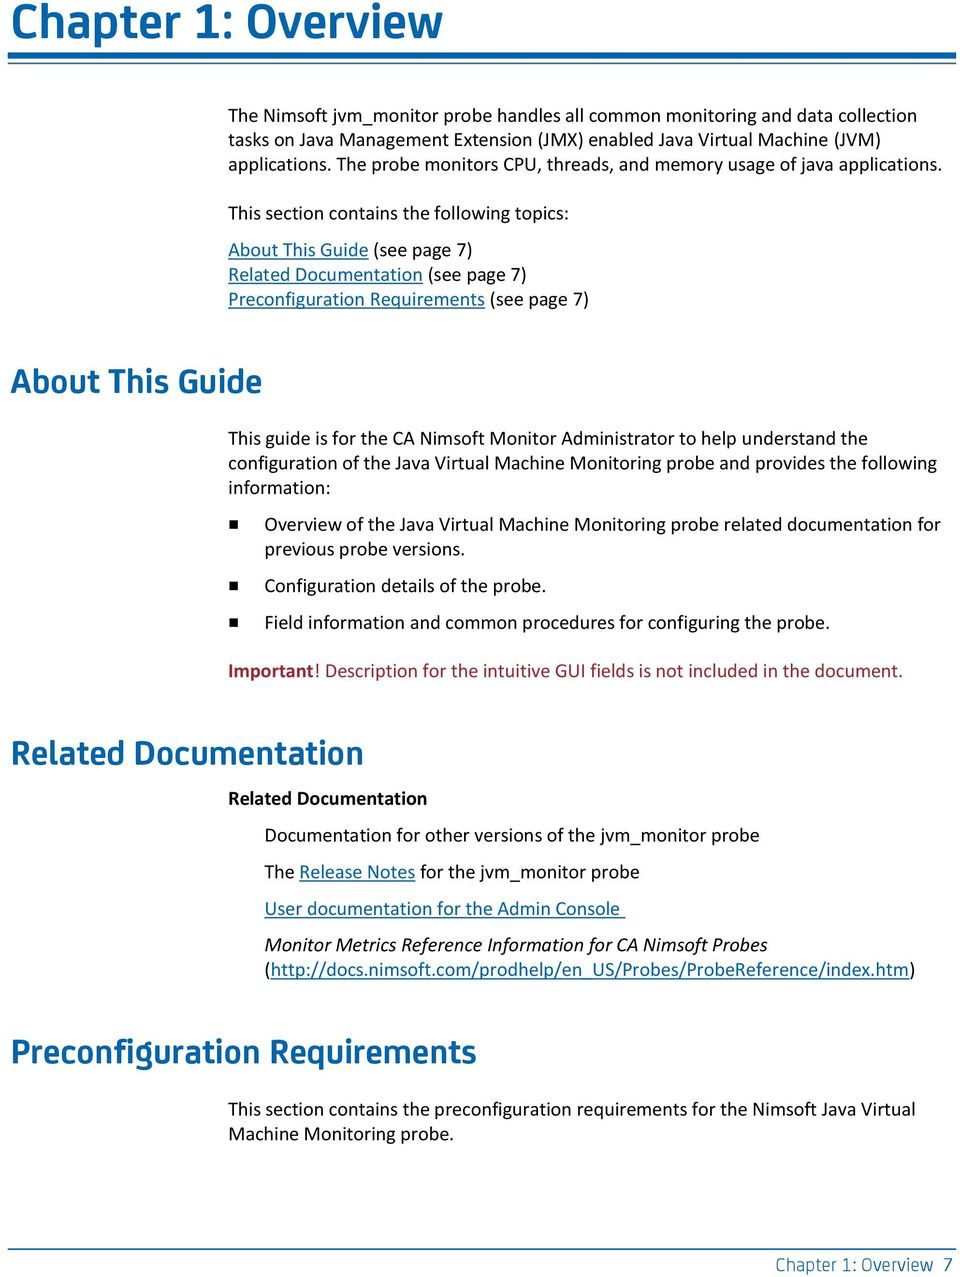 This section contains the following topics: About This Guide (see page 7) Related Documentation (see page 7) Preconfiguration Requirements (see page 7) About This Guide This guide is for the CA